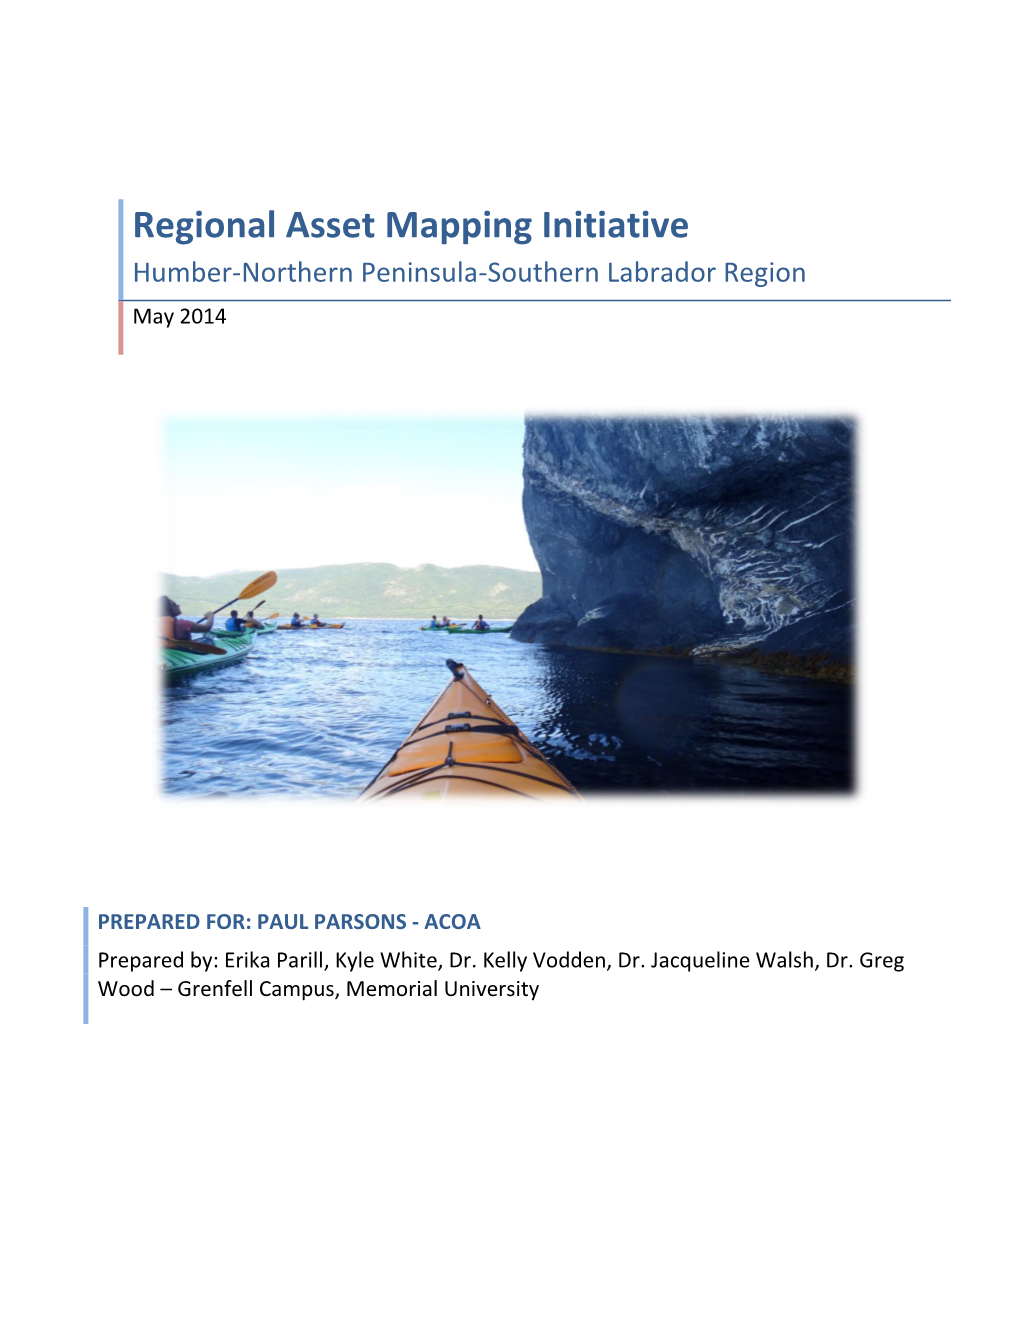 Regional Asset Mapping Initiative, Humber